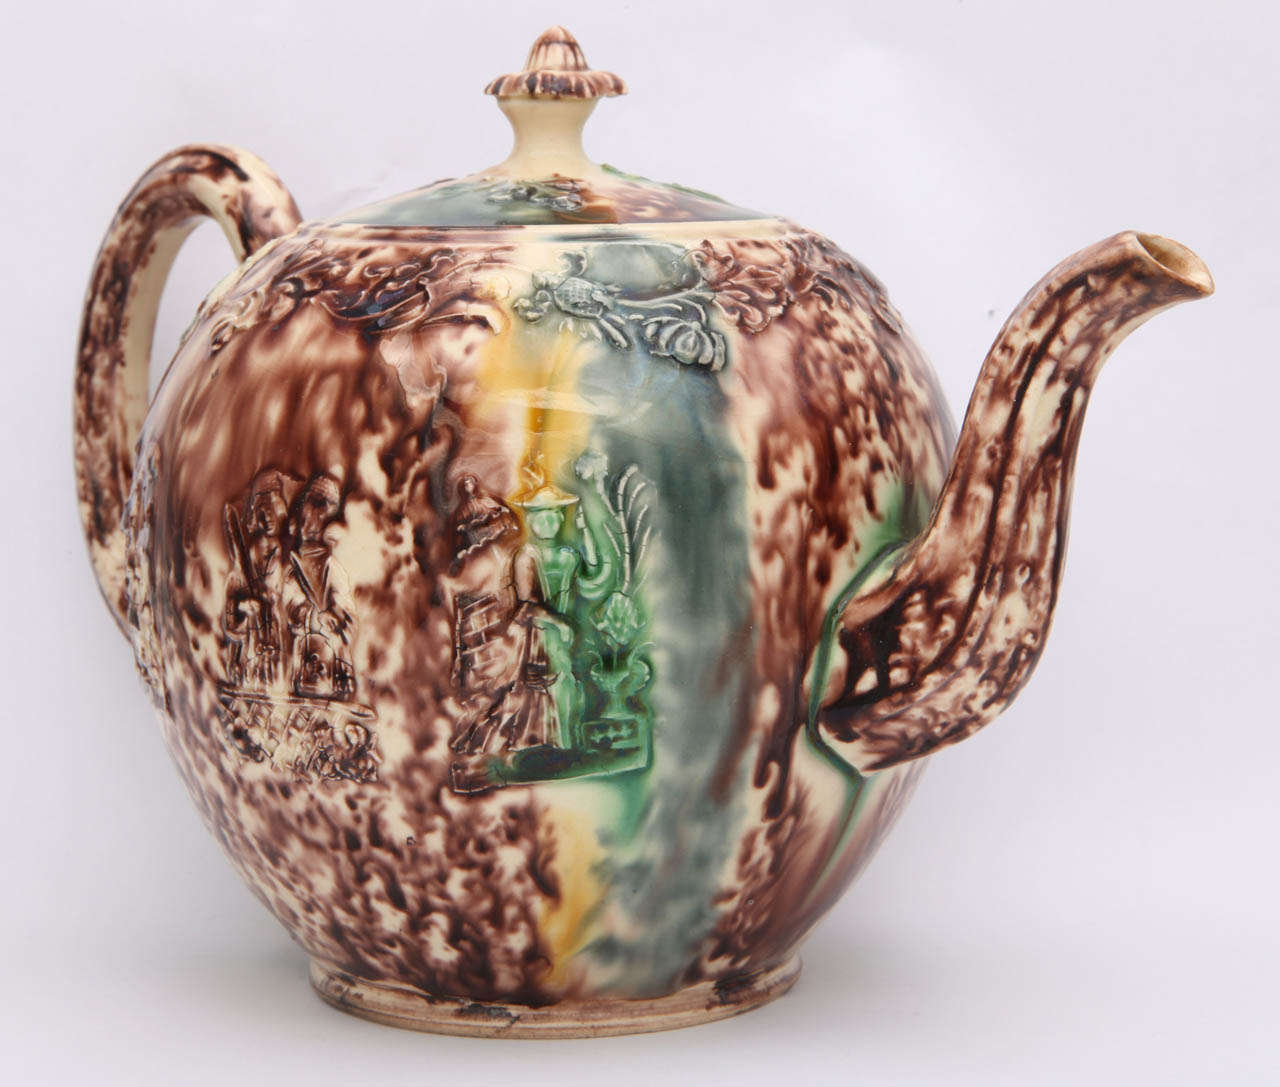 A rare unmarked  William Greatbatch pottery tortoise glaze teapot with Oriental figures in relief and decorated in underglaze oxide colors